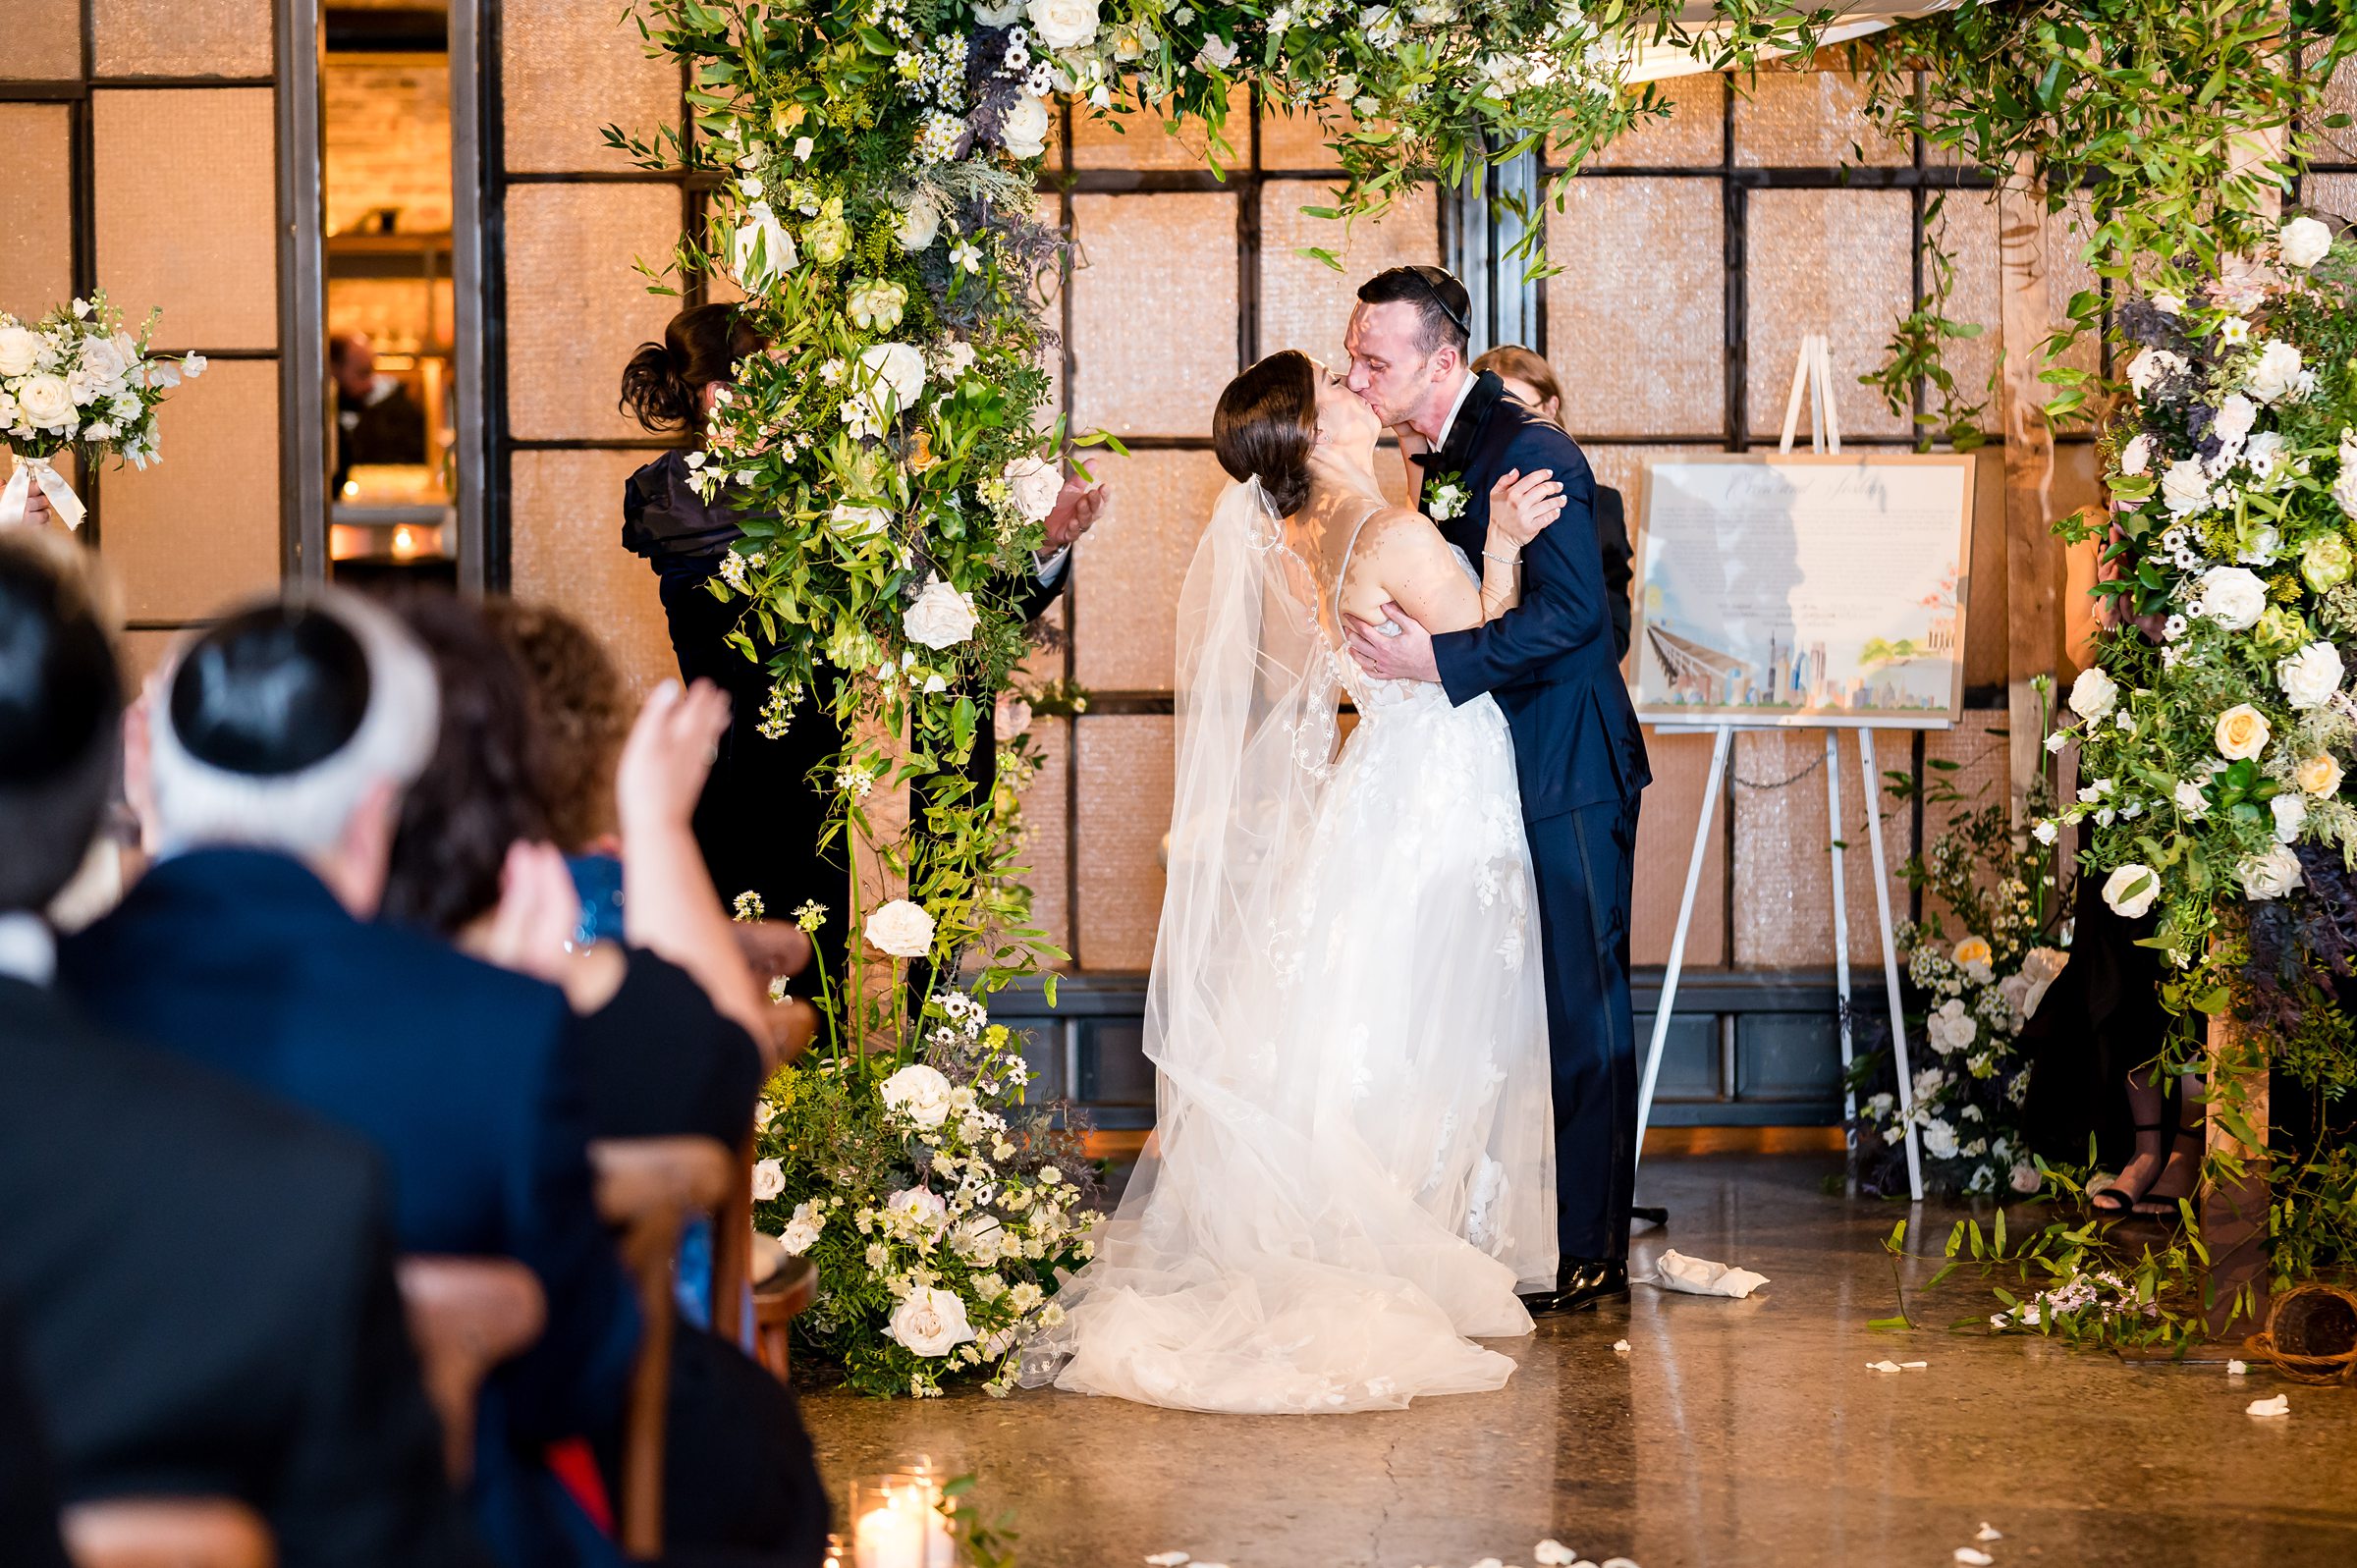 At a Wedding ceremony planned by Lilah Events, the bride and groom share a kiss under a floral arch.